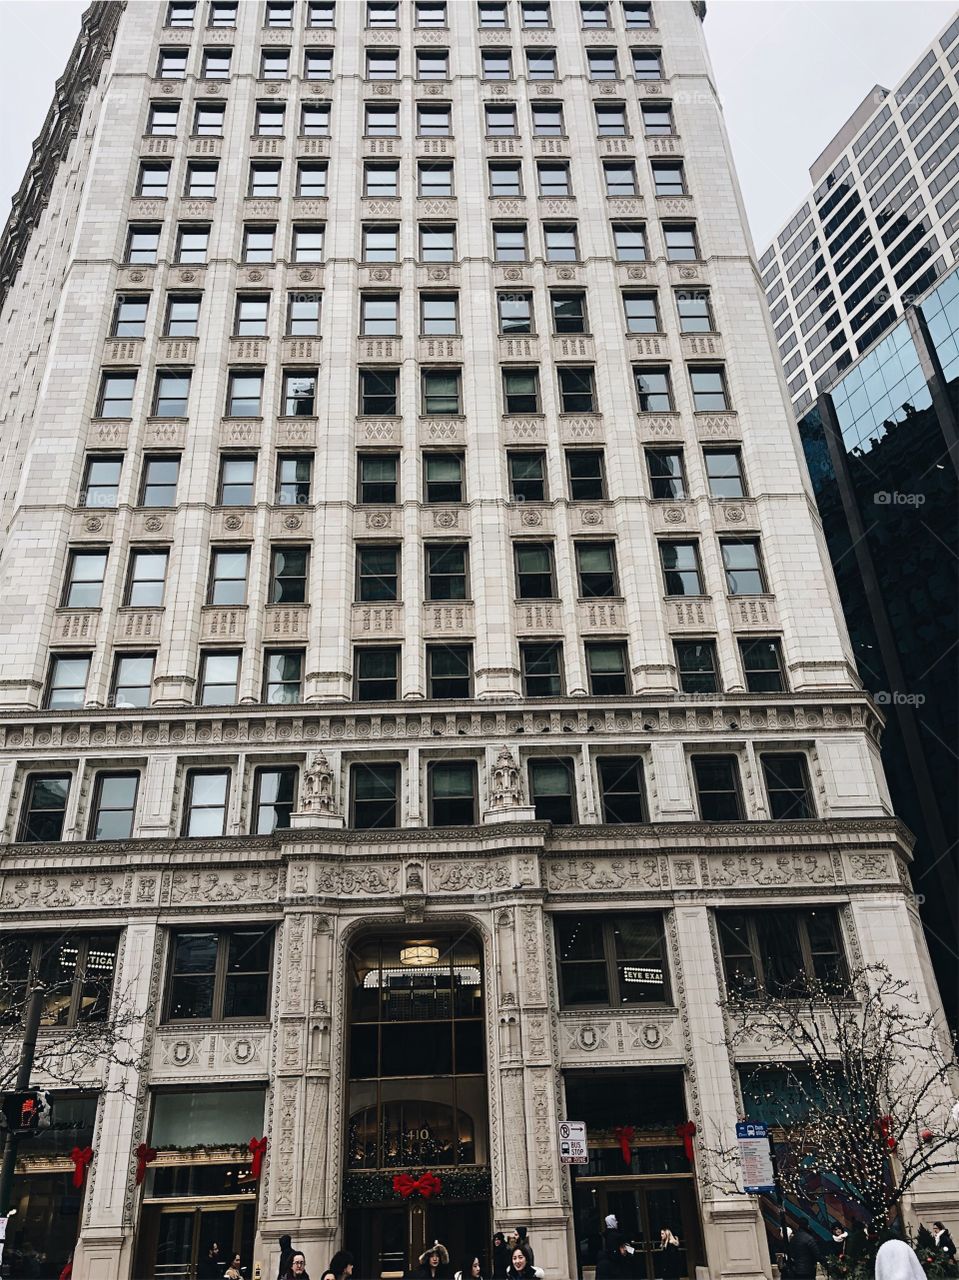 An old beautiful building in downtown Chicago